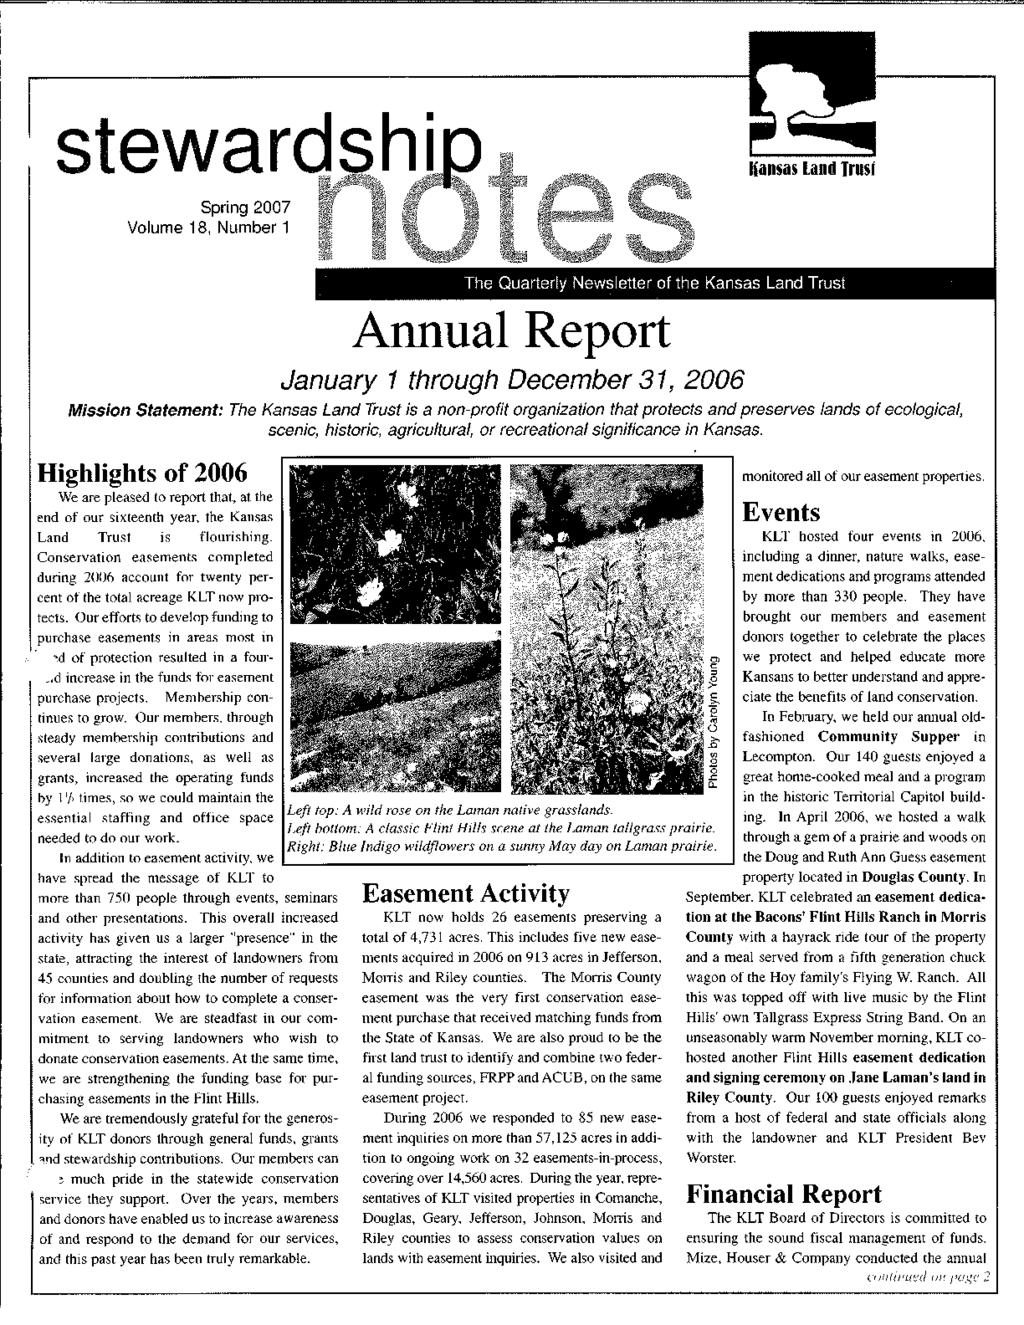 Spring 2007 Volume 18, Number 1 Annual Report January 1 through December 31, 2006 Mission Statement: The Kansas Land Trust is a non-profit organization that protects and preserves lands of